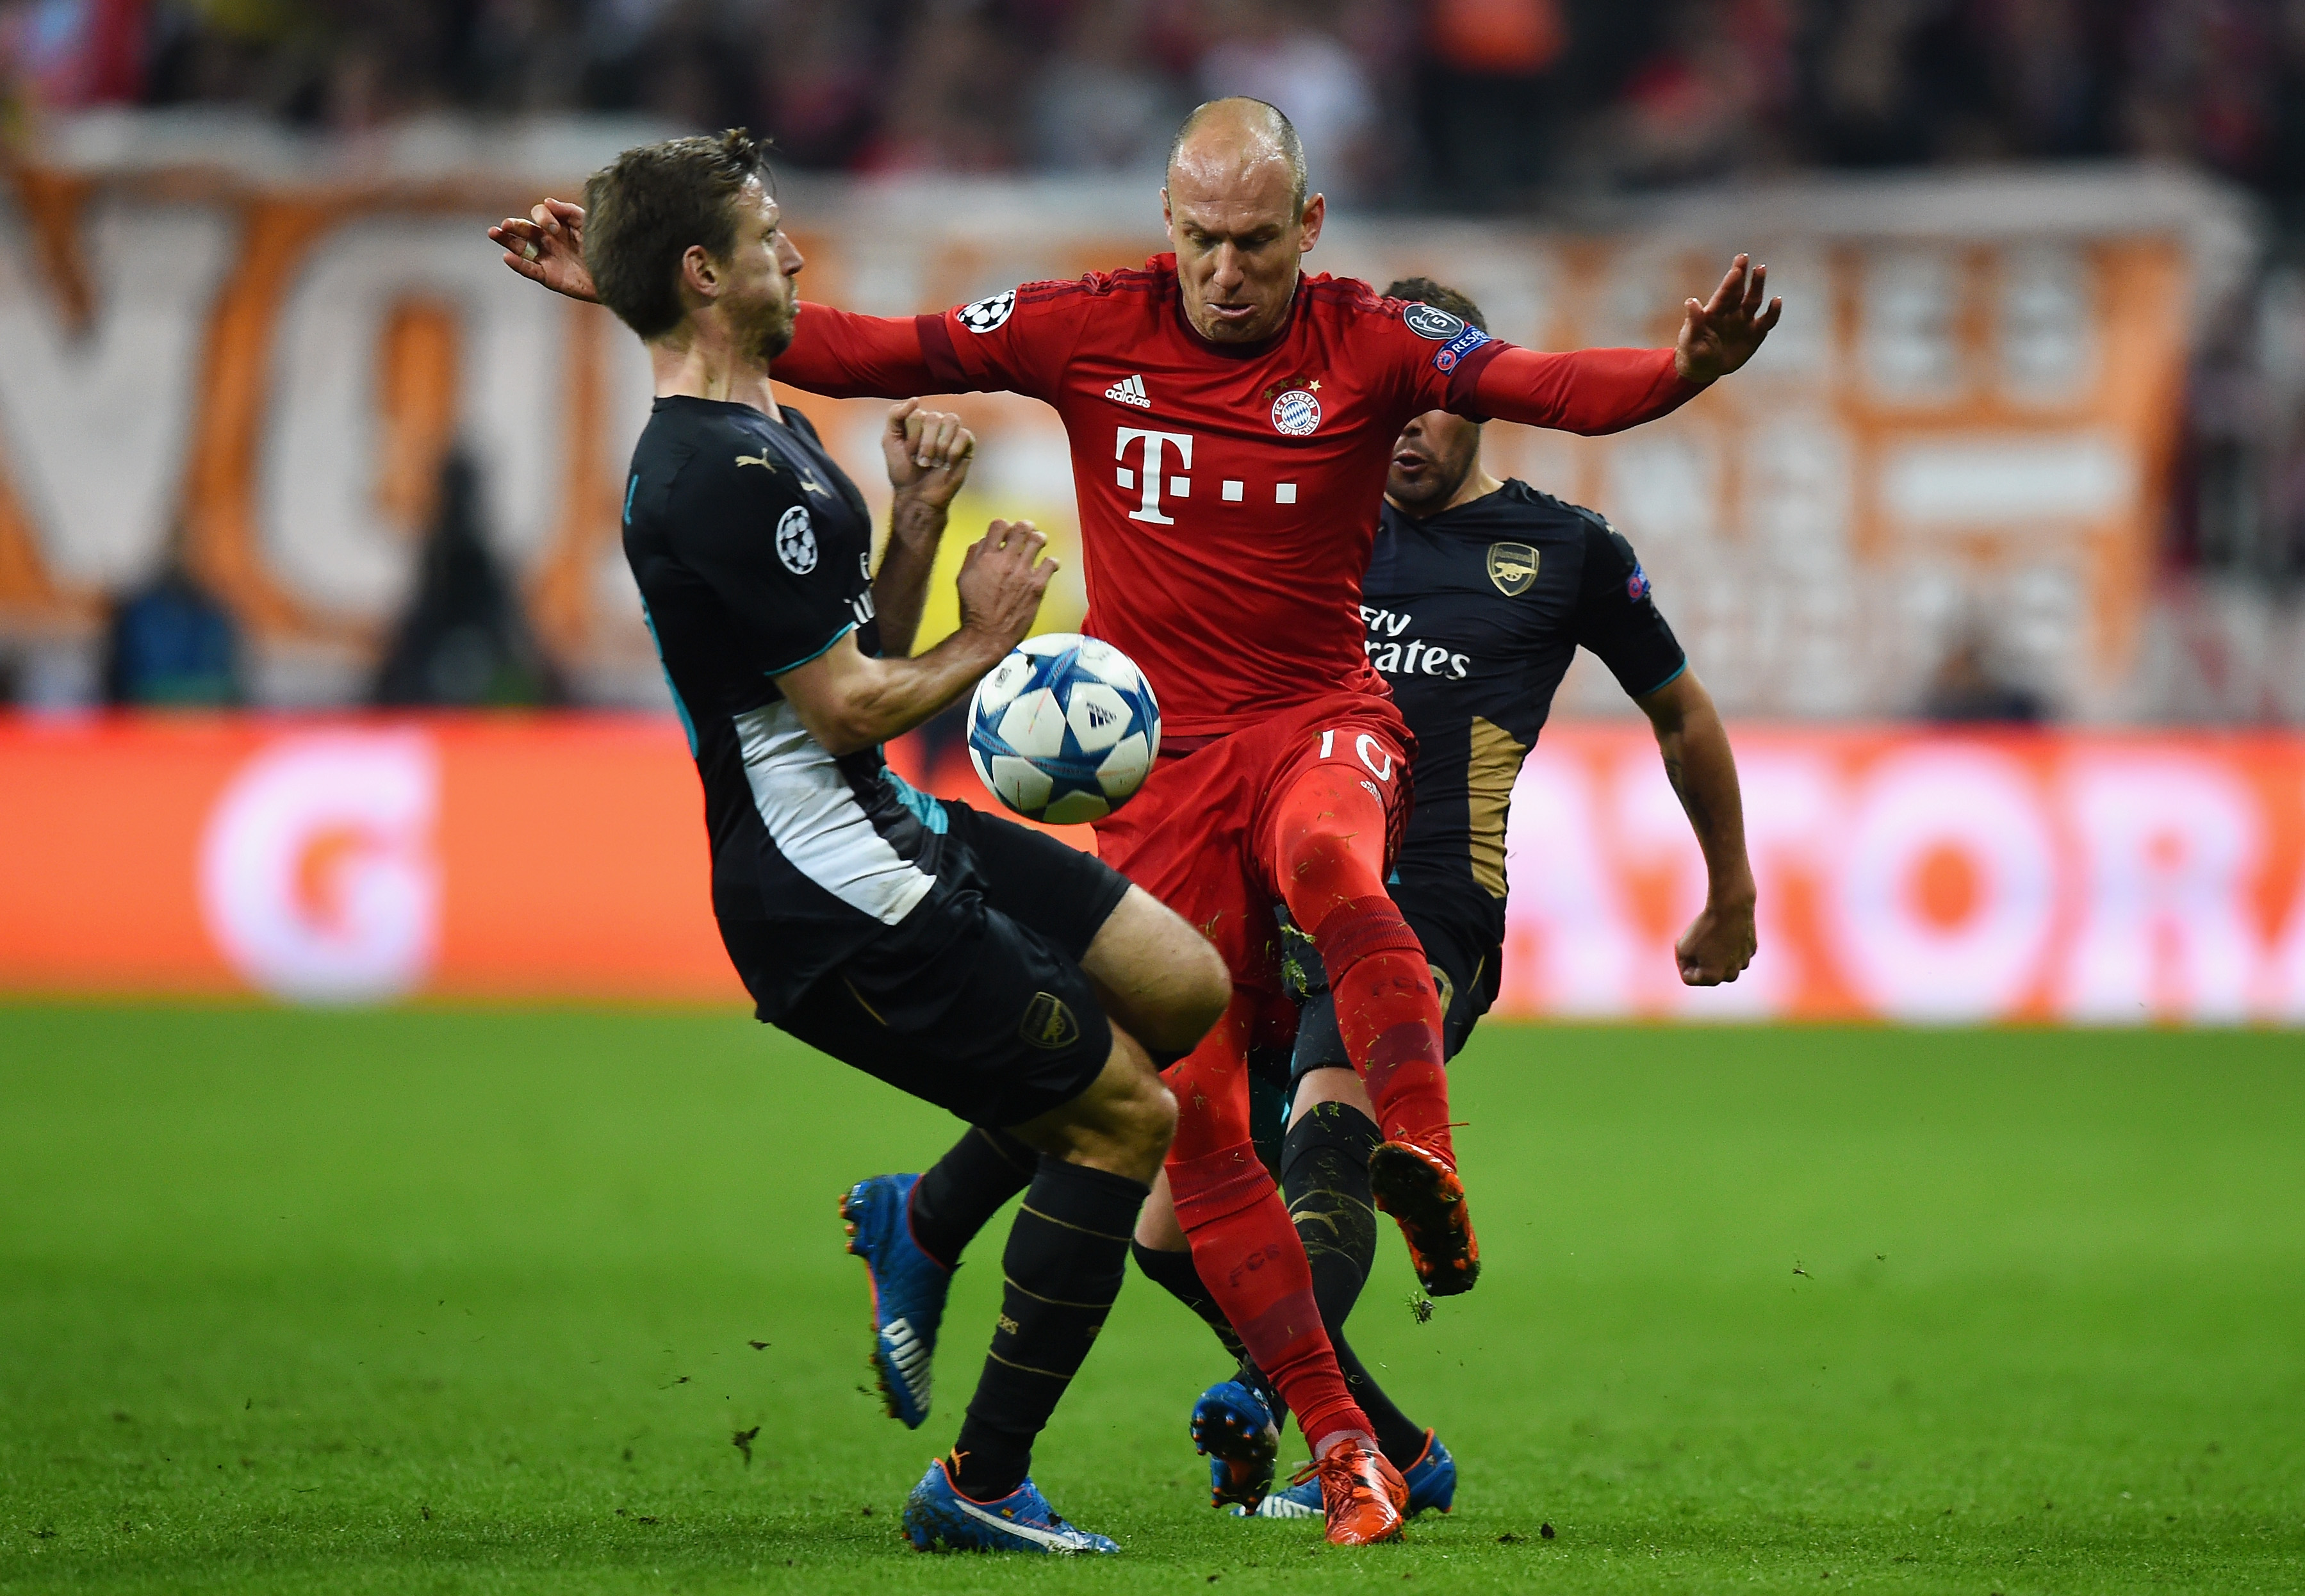 MUNICH, GERMANY - NOVEMBER 04:  Arjen Robben of Bayern Muenchen is challenged by Nacho Monreal of Arsenal during the UEFA Champions League Group F match between FC Bayern Muenchen and Arsenal FC at the Allianz Arena on November 4, 2015 in Munich, Germany.  (Photo by Lars Baron/Bongarts/Getty Images)